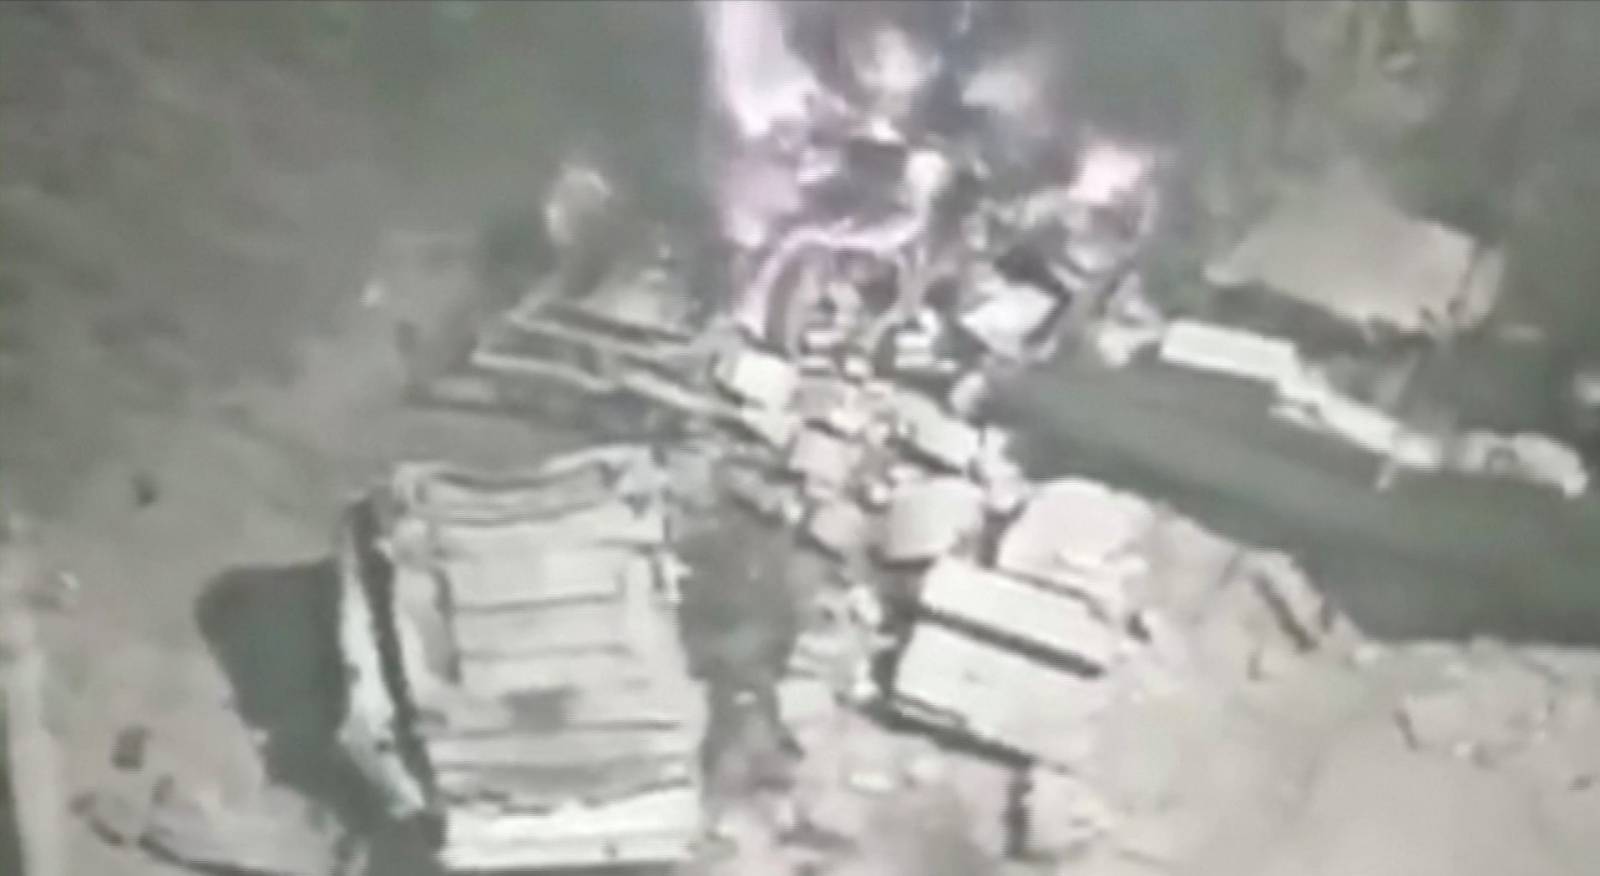 Video grab of an airstrike hitting an area in Afghanistan